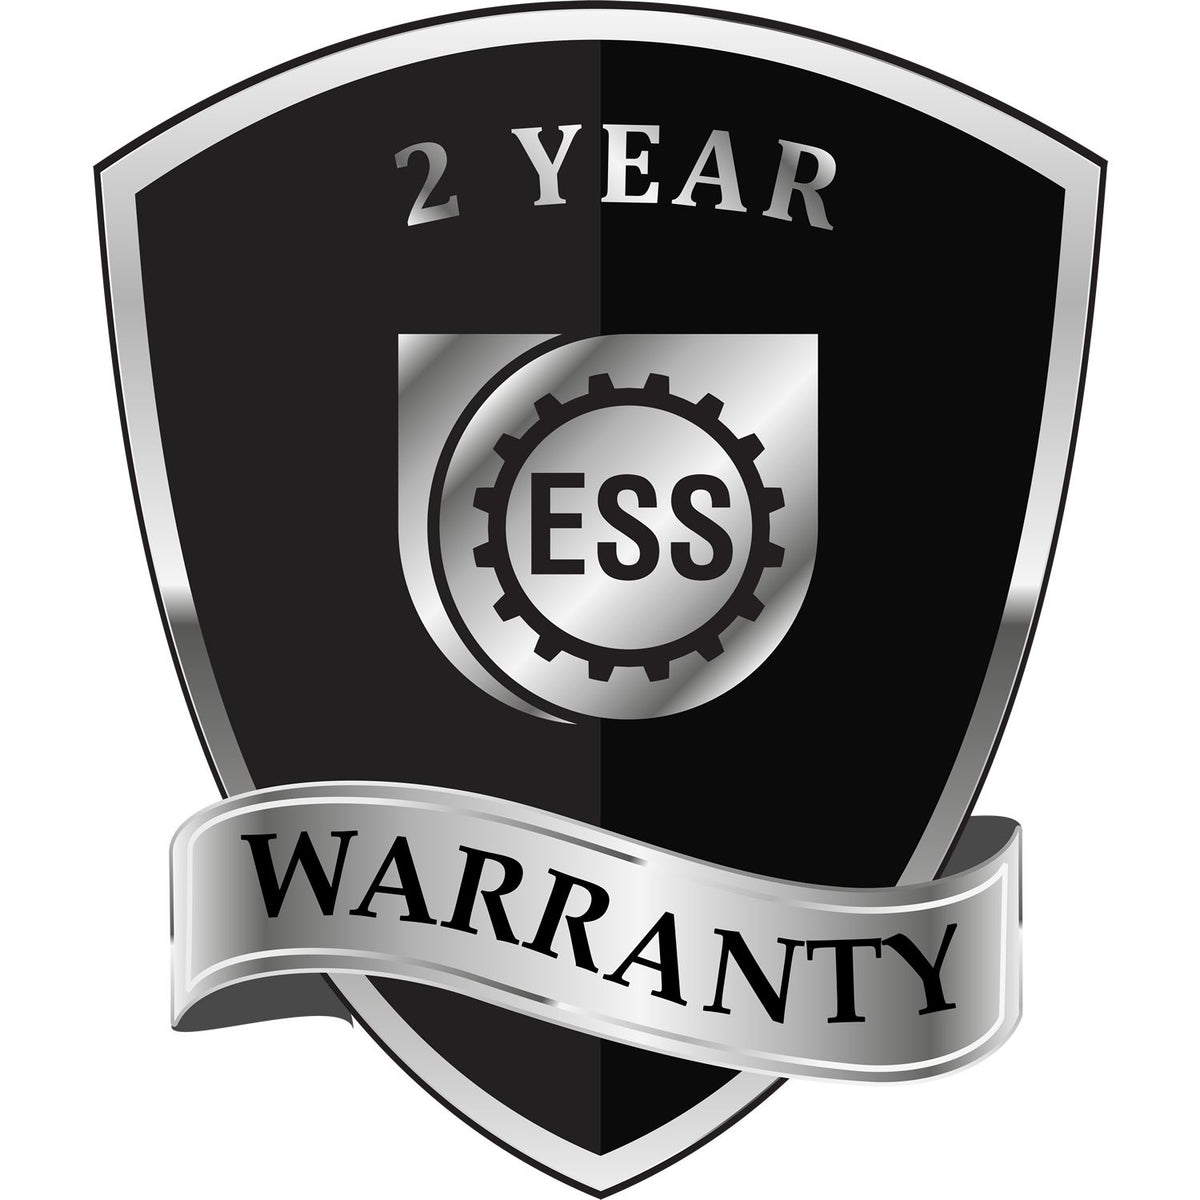 A black and silver badge or emblem showing warranty information for the Gift Texas Land Surveyor Seal